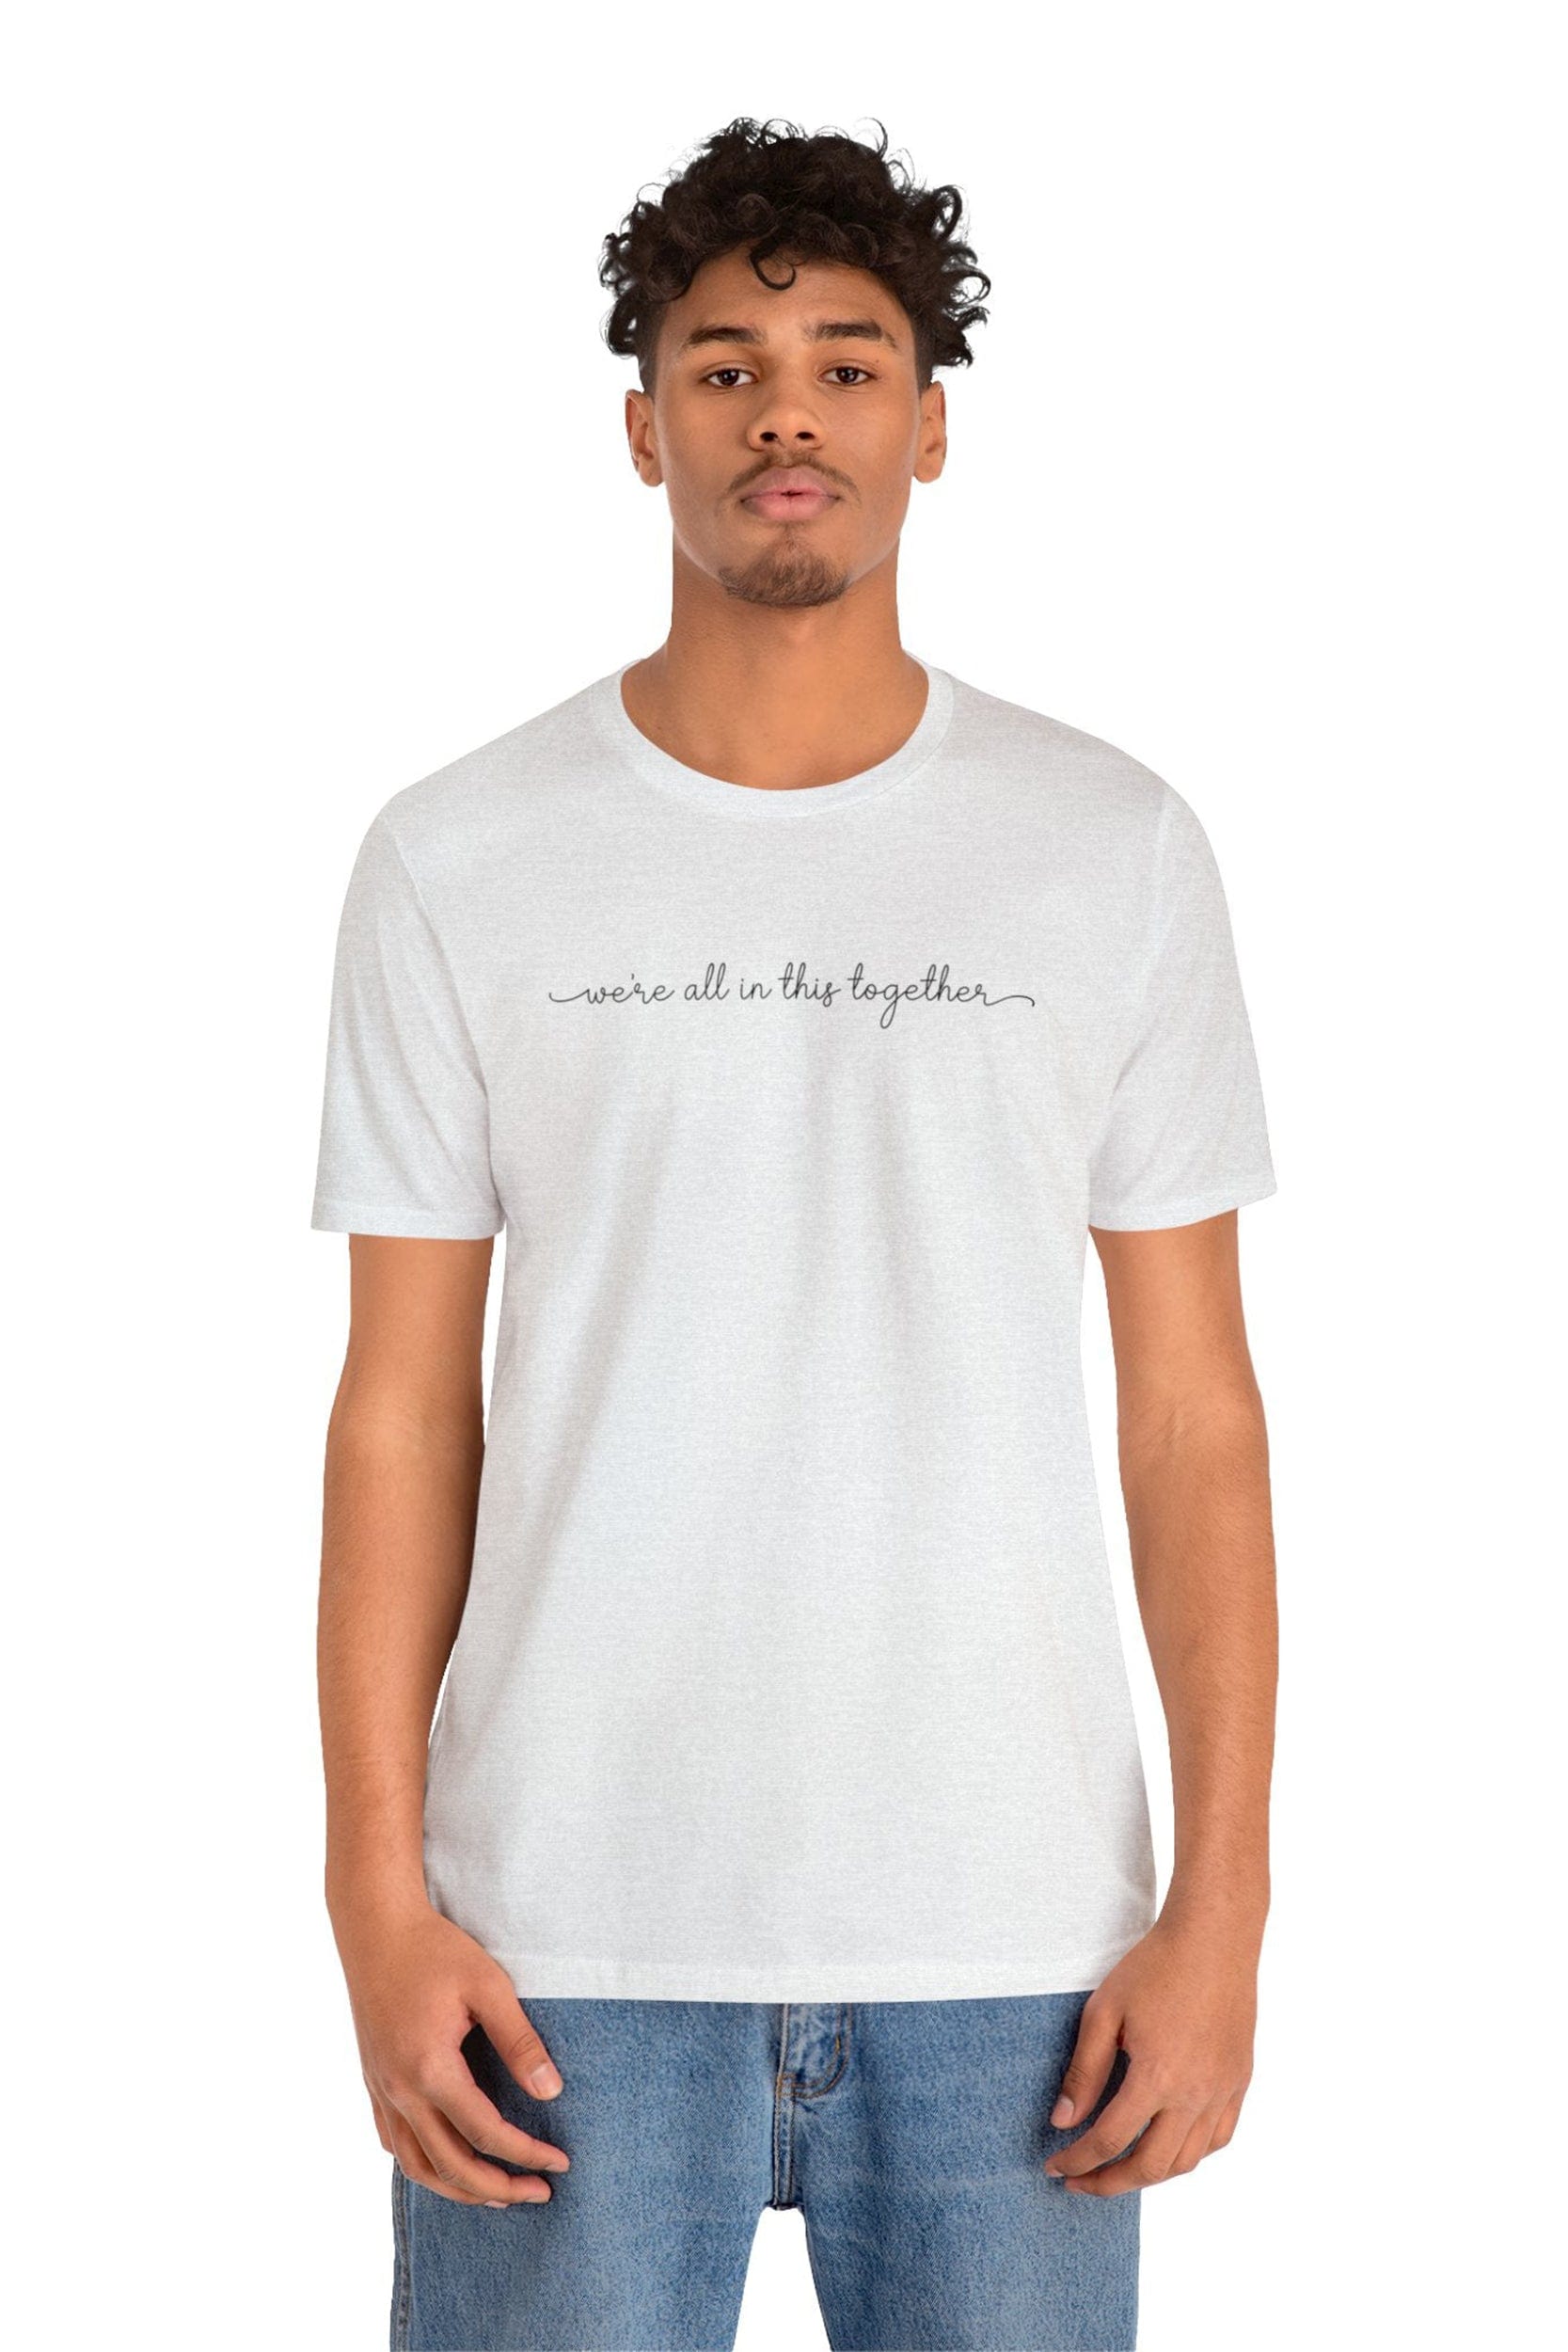 "we're all in this together" T-Shirt